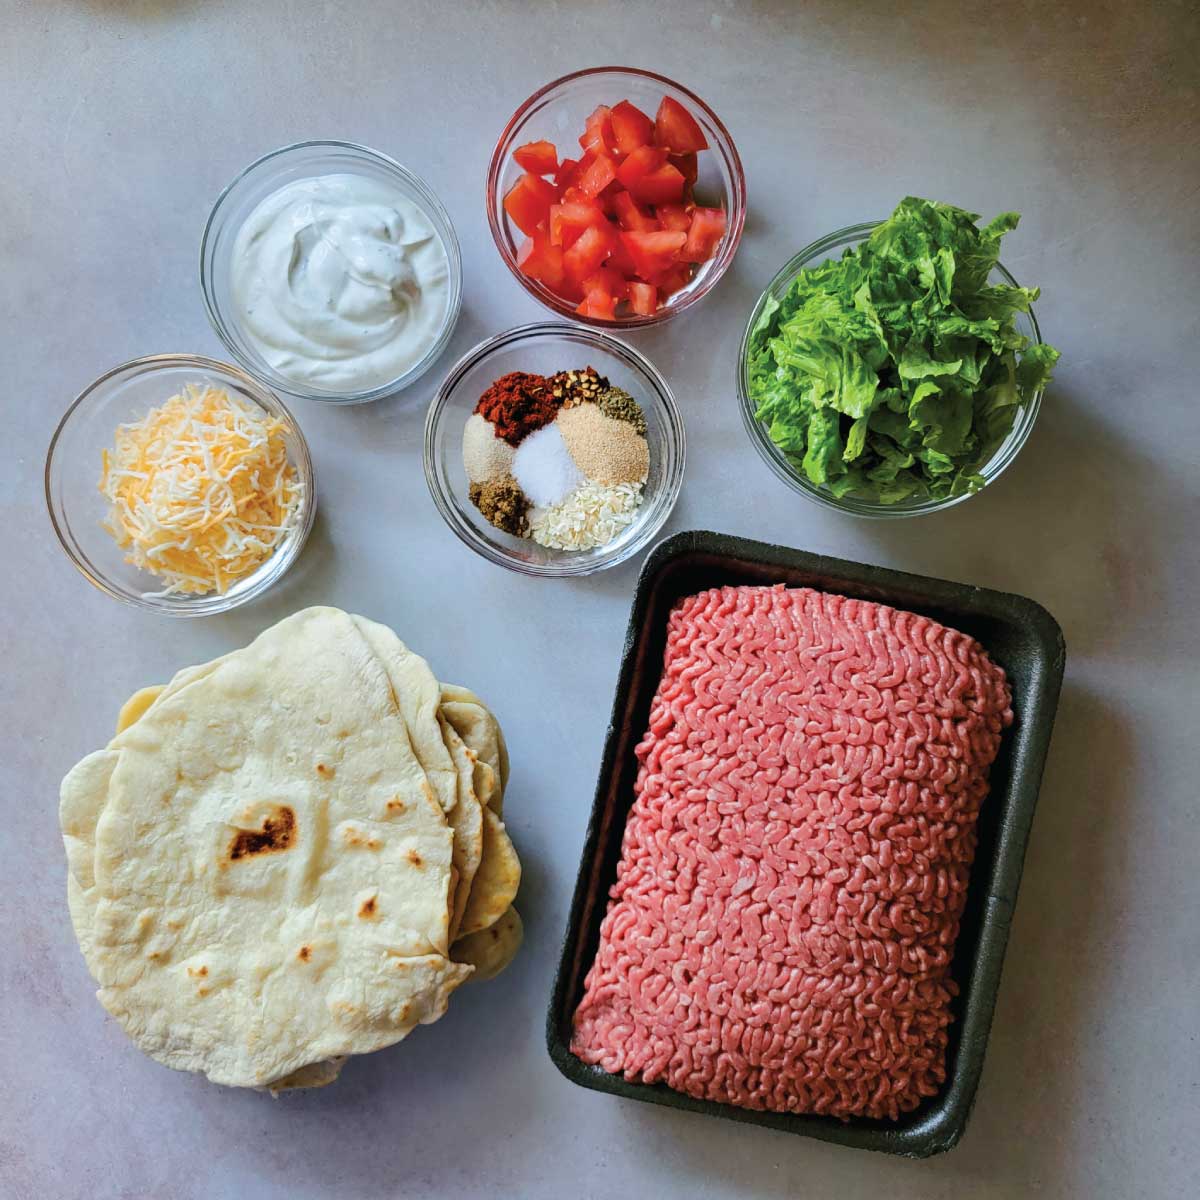 Ingredients prepped for tacos including some common toppings.